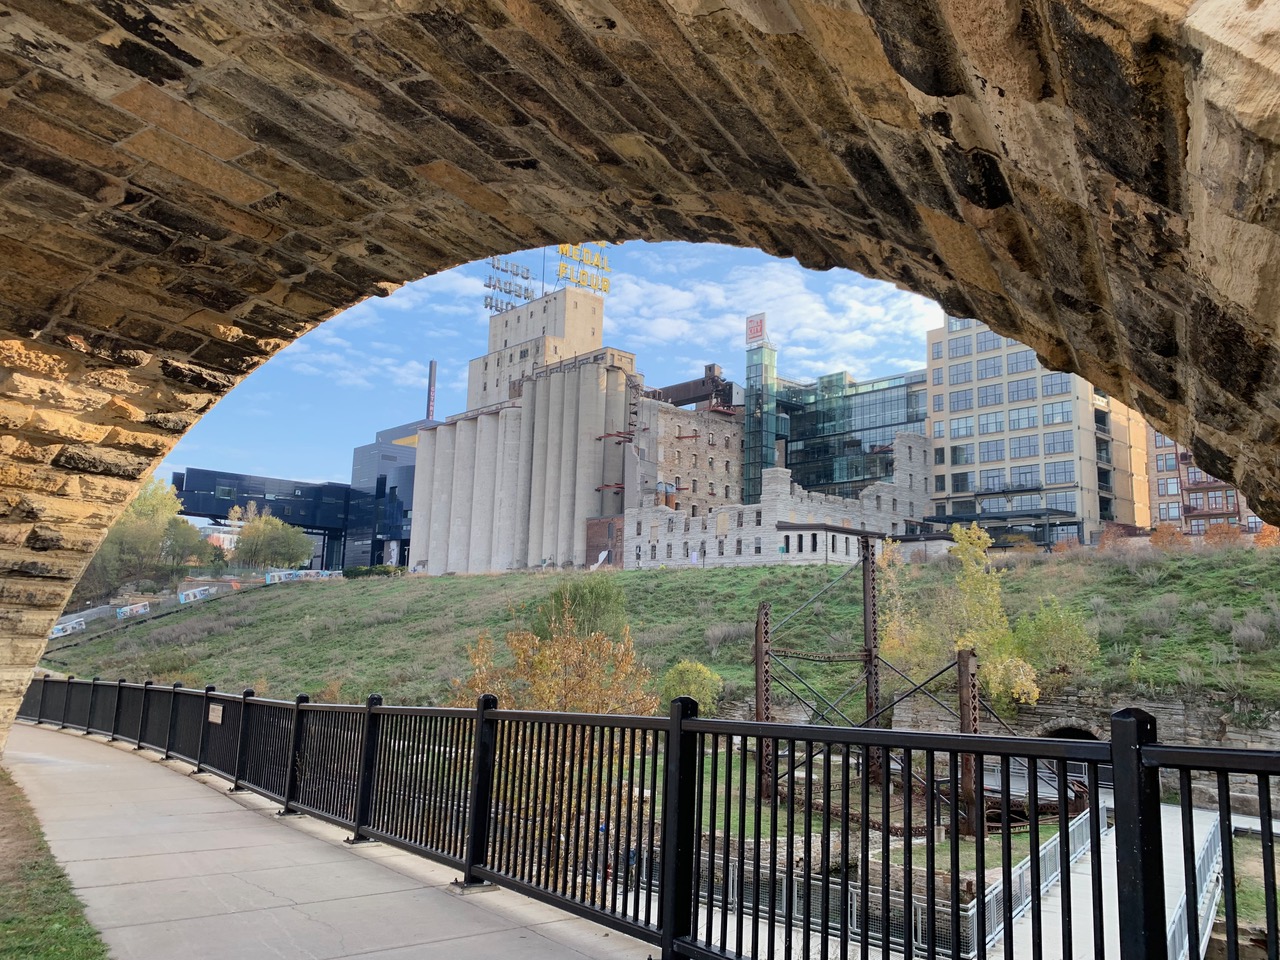 A view of the museum from beneath one of the arches of the Stone Arch Bridge.